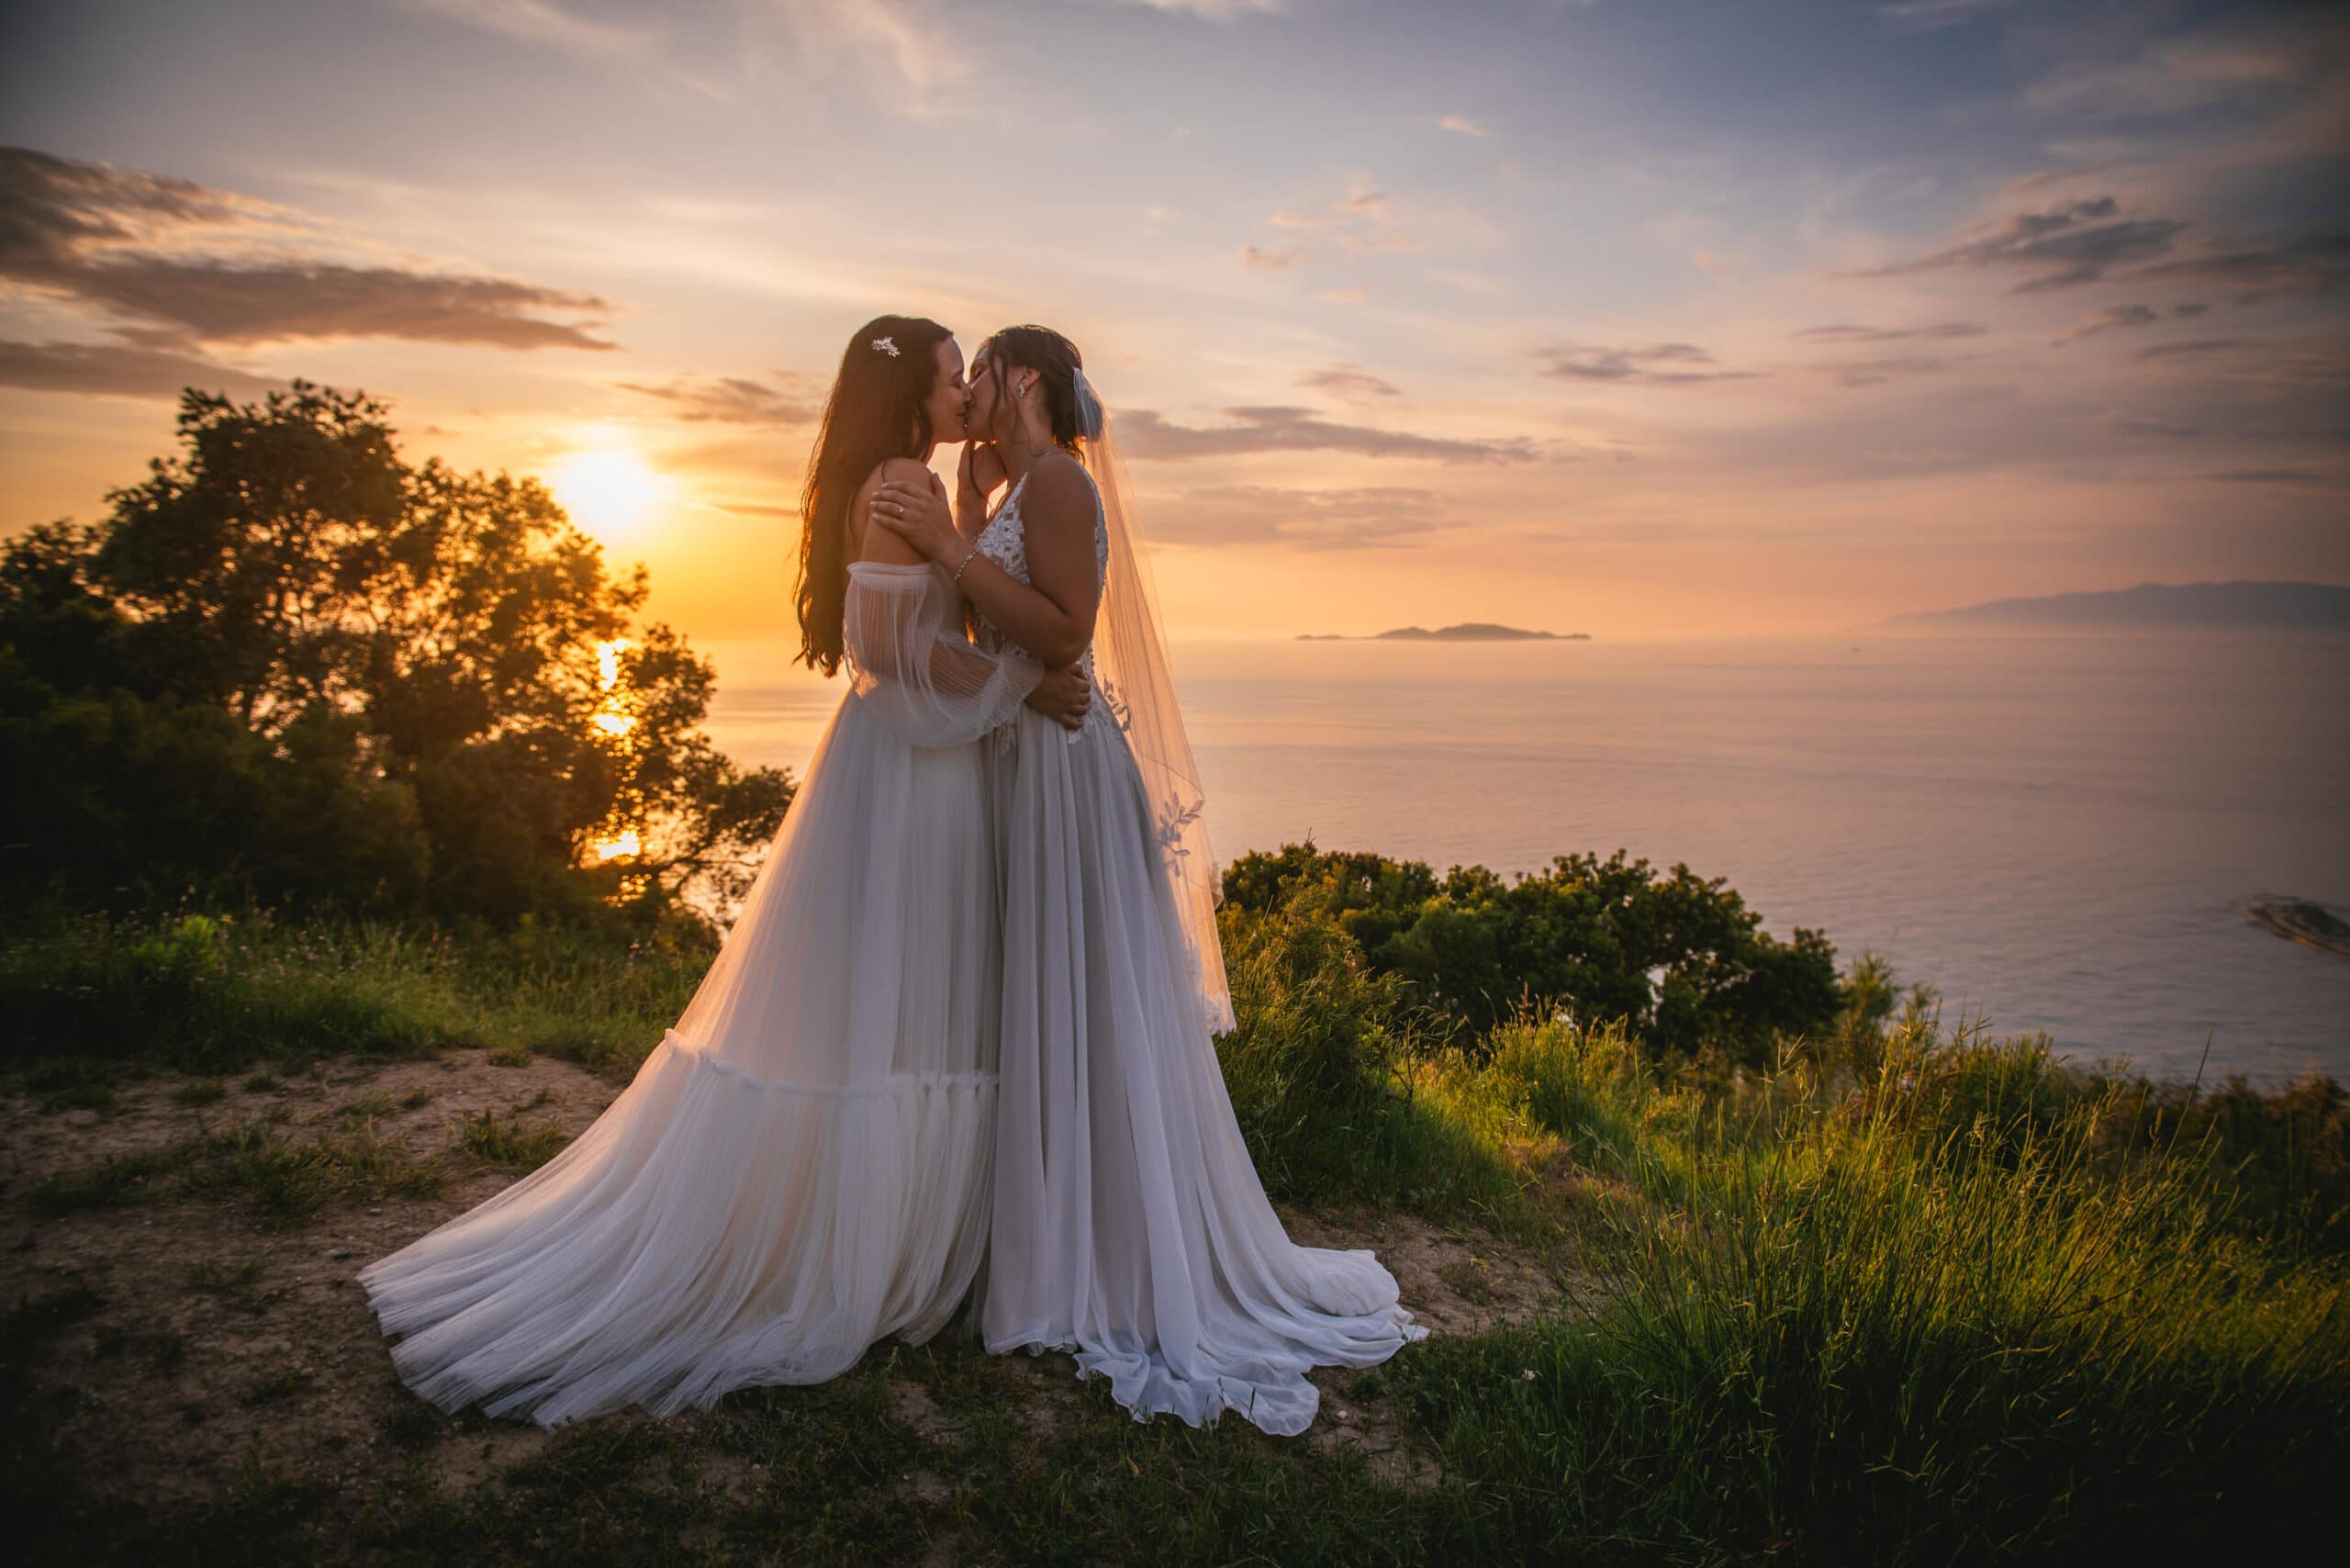 Brides bathed in sunset's glow, creating a magical moment in Corfu elopement.